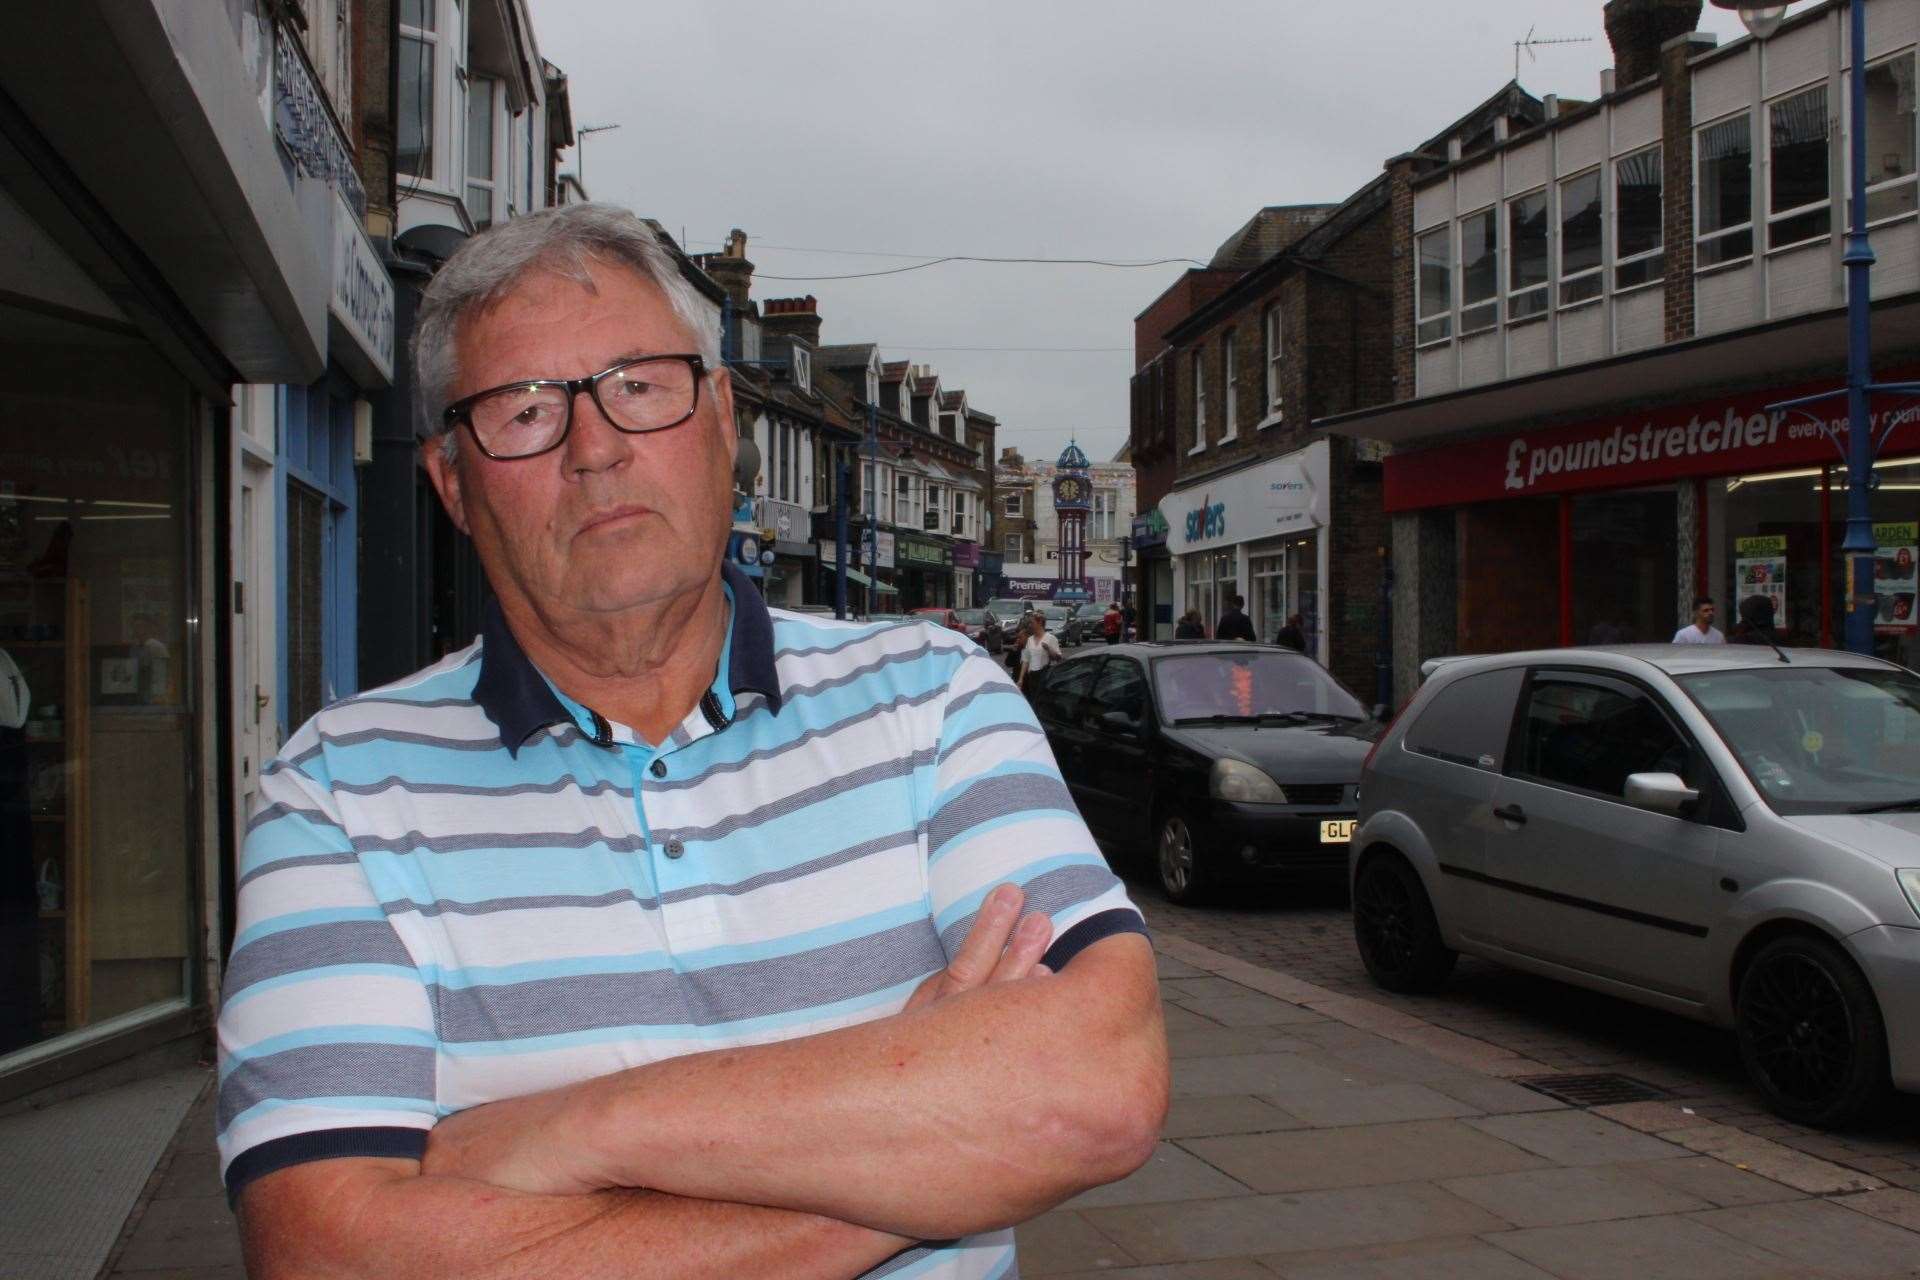 Cllr Brian Spoor questioned why Aldi isn't planning on keeping its Sheerness store open